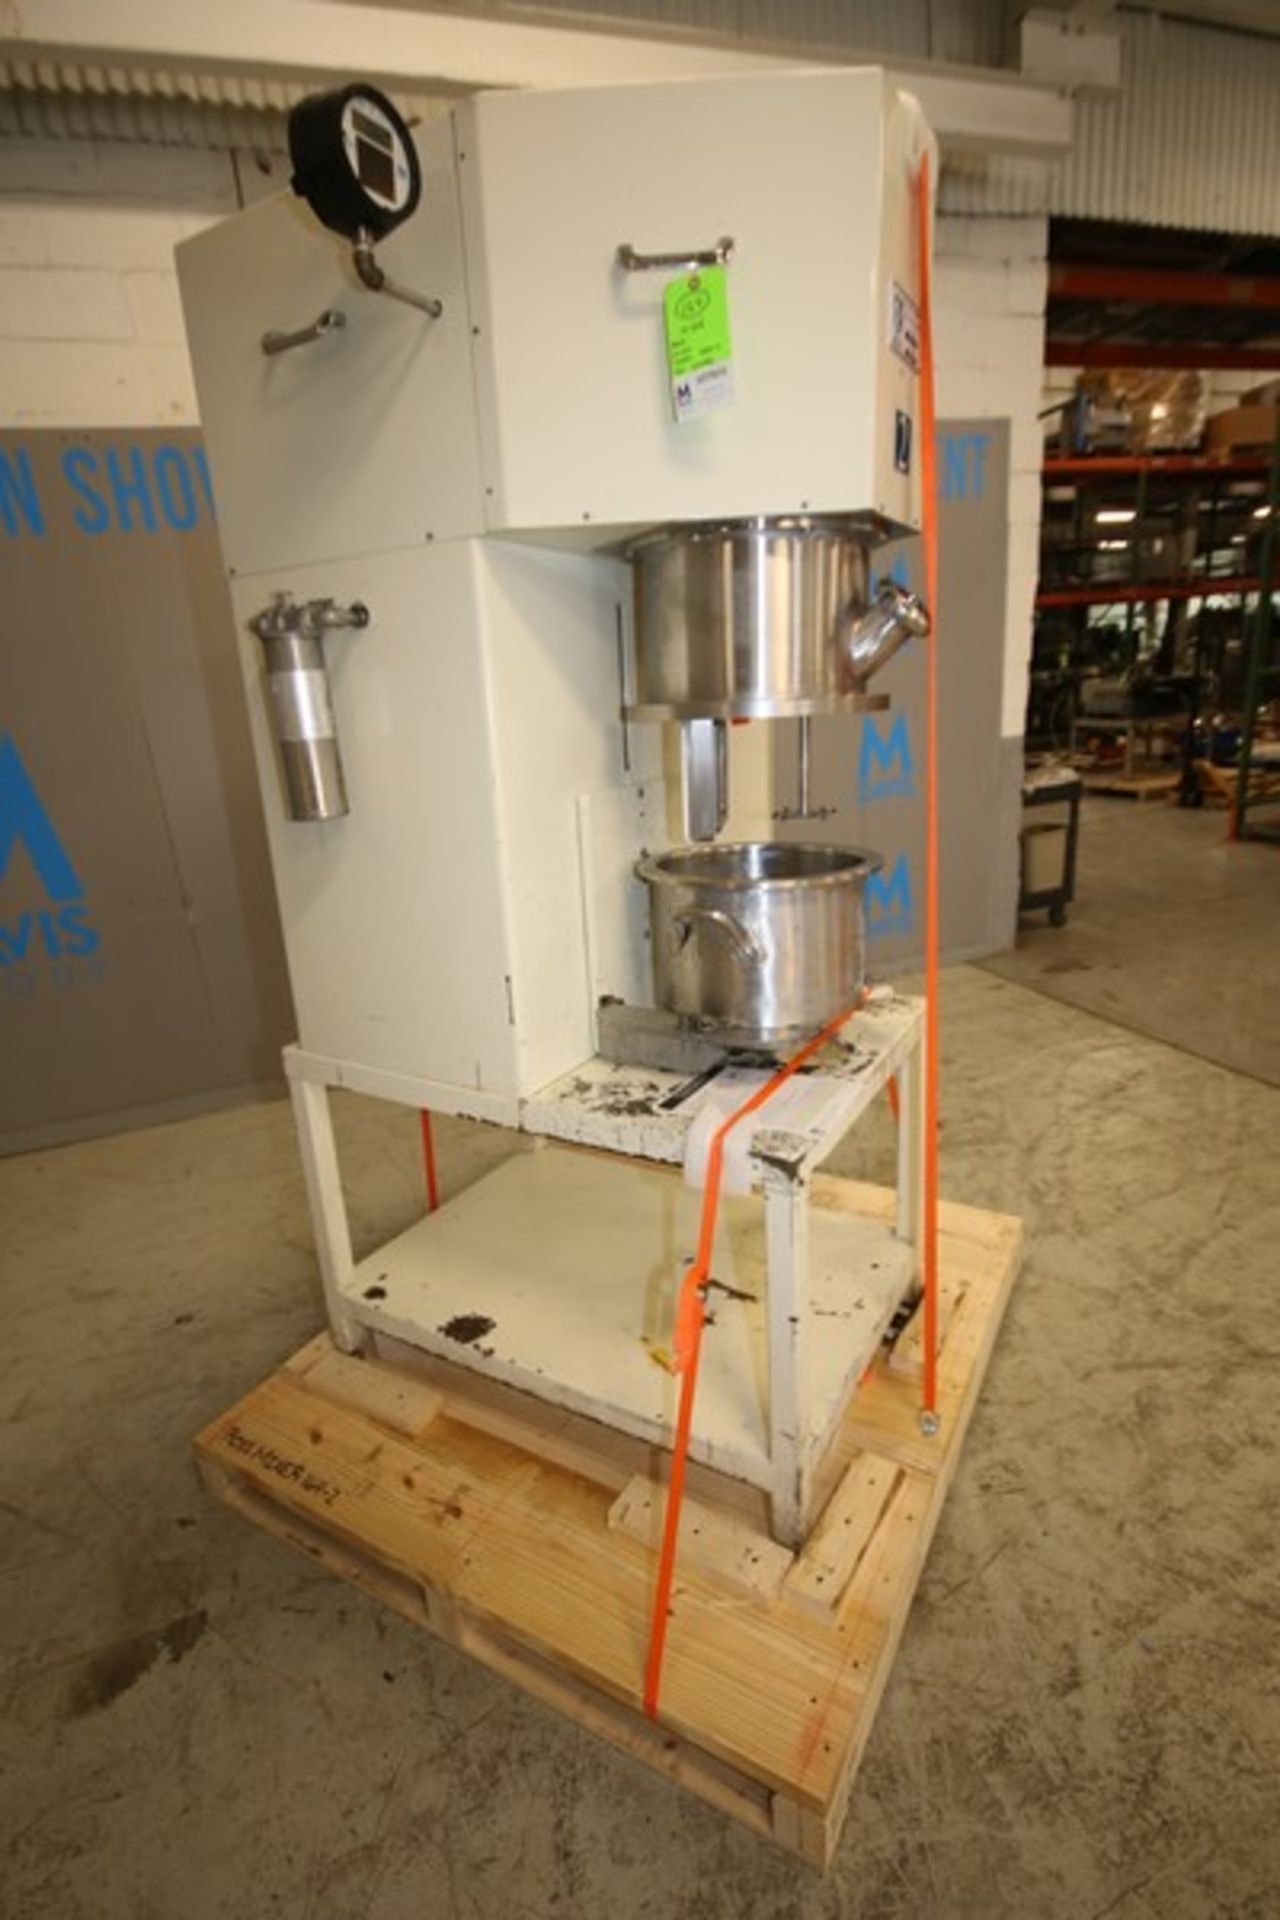 Ross Planetary Mixer, Model PDM-4, SN 104096, with Stirrer & Disperser, 14" W x 8" D S/S Mixing